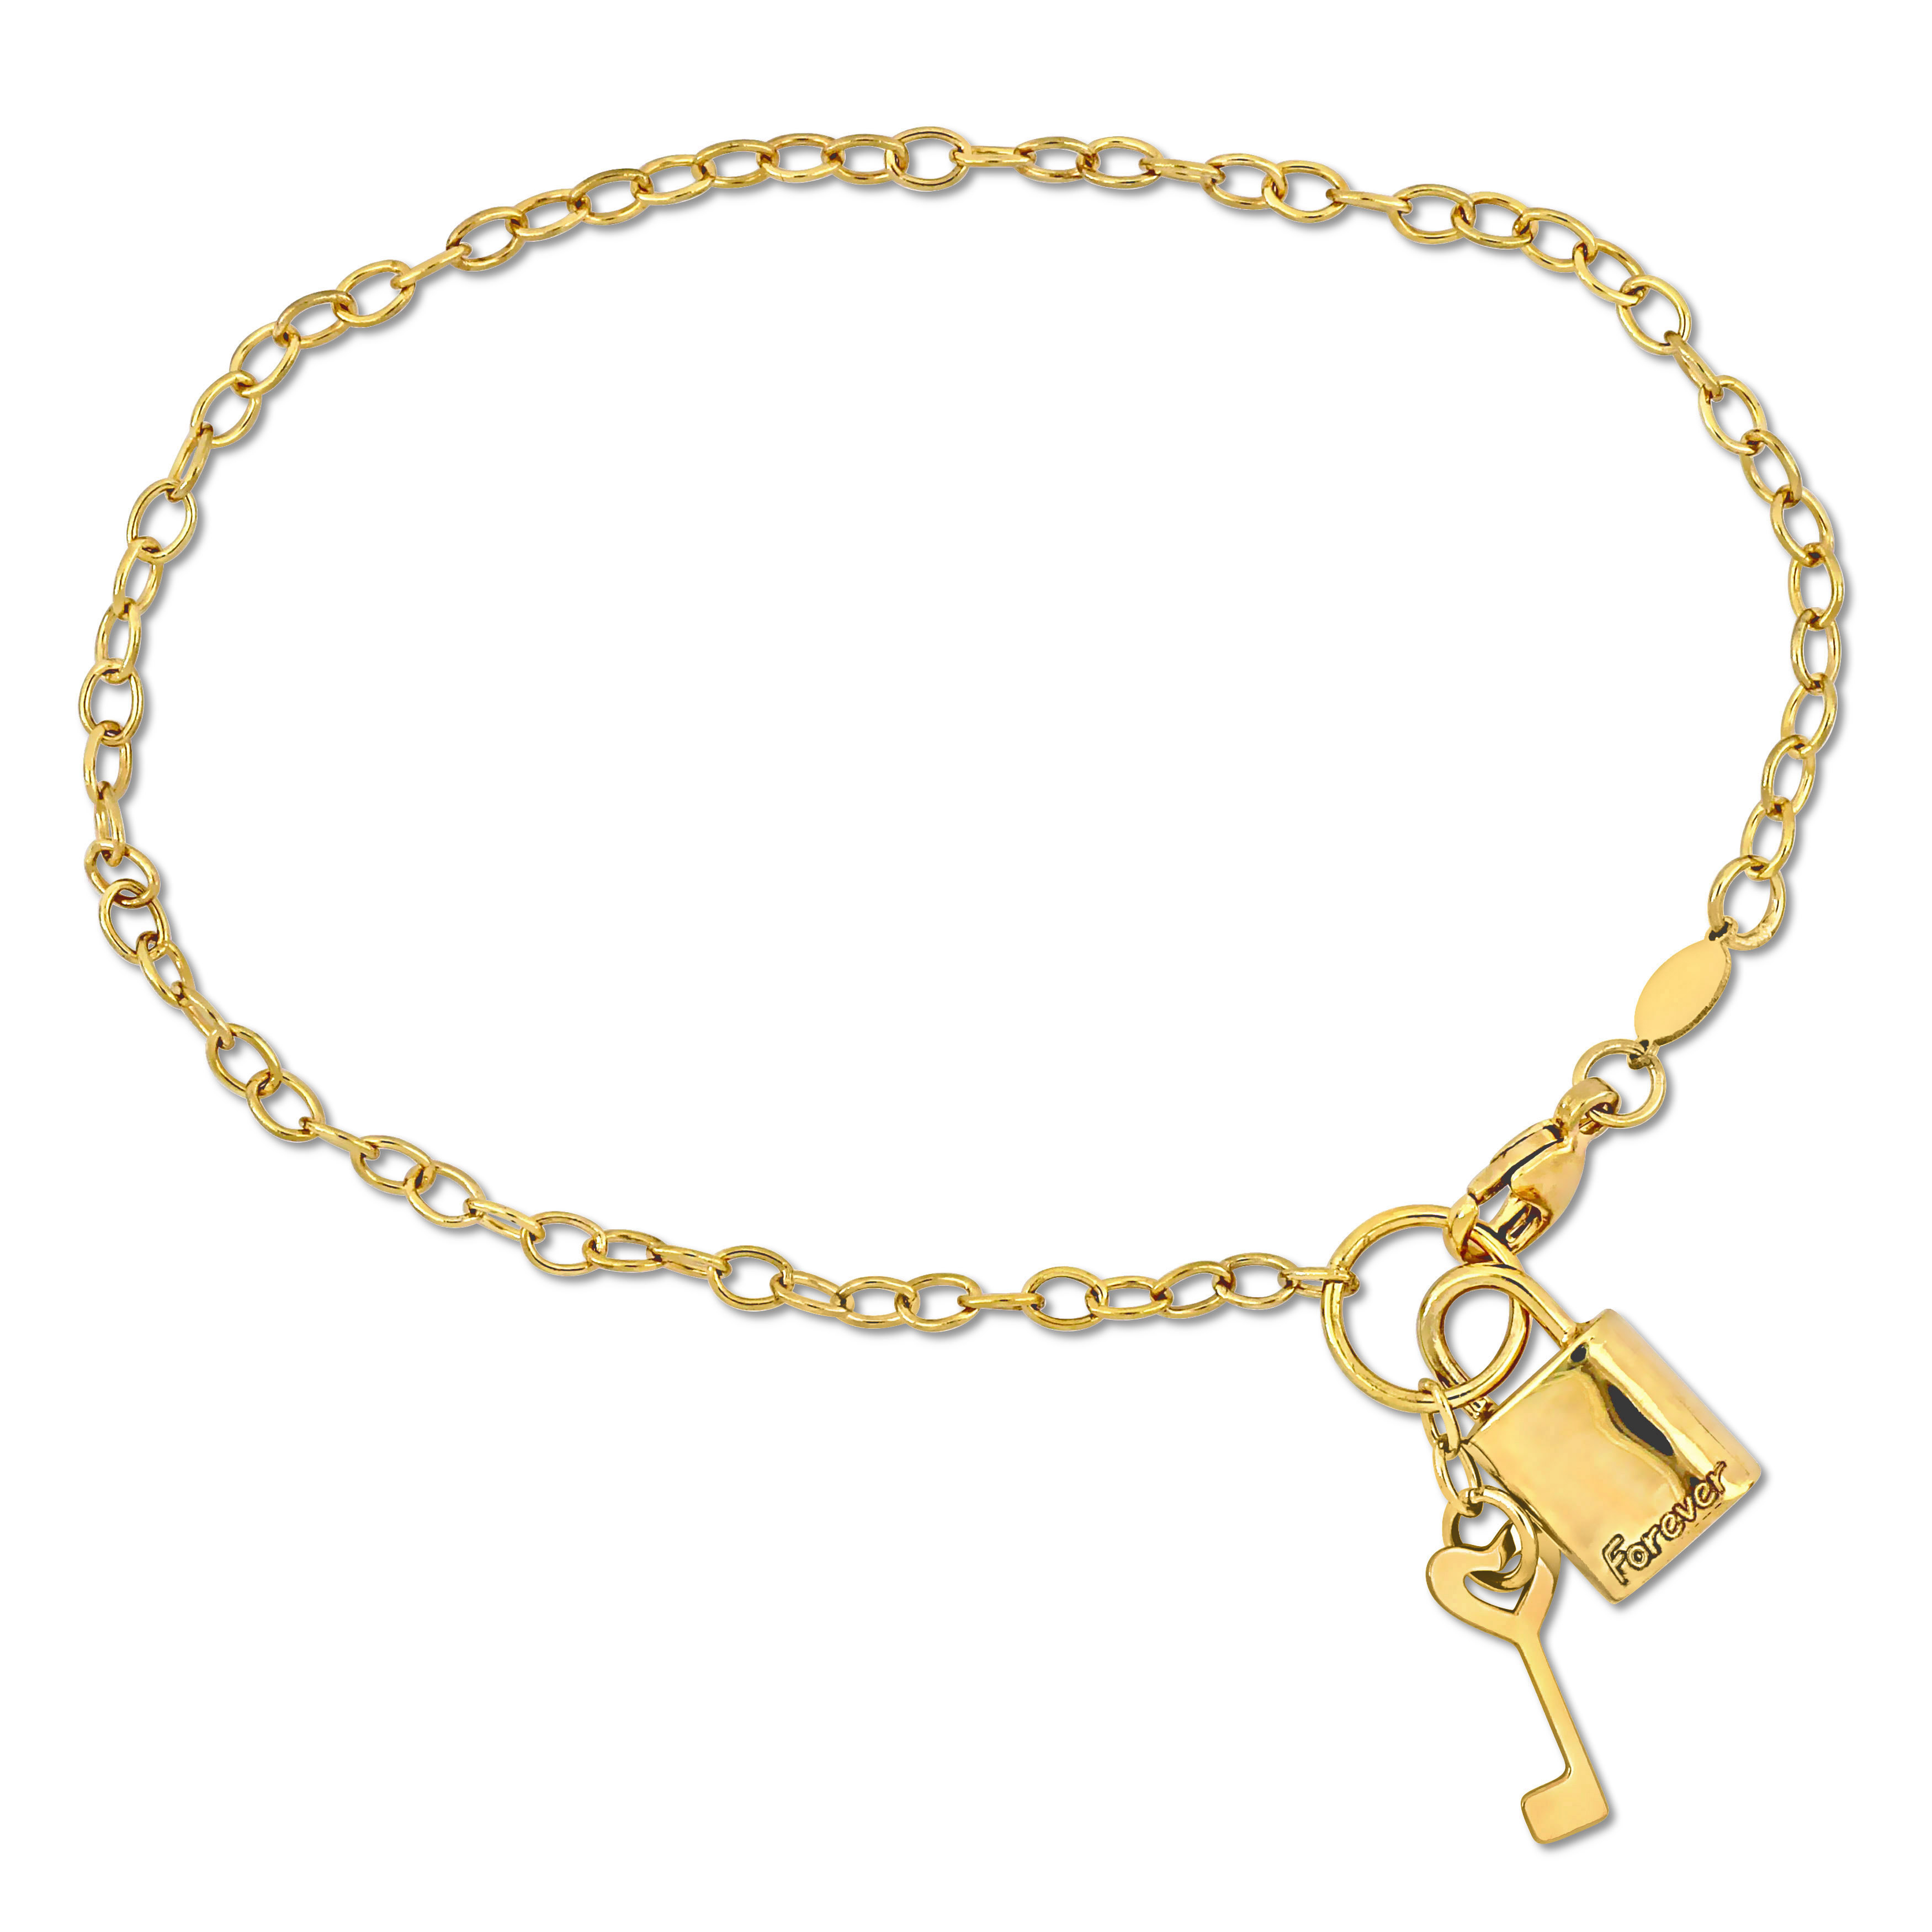 Lock and Key Charm Bracelet in 14k Yellow Gold- 7.5 in.